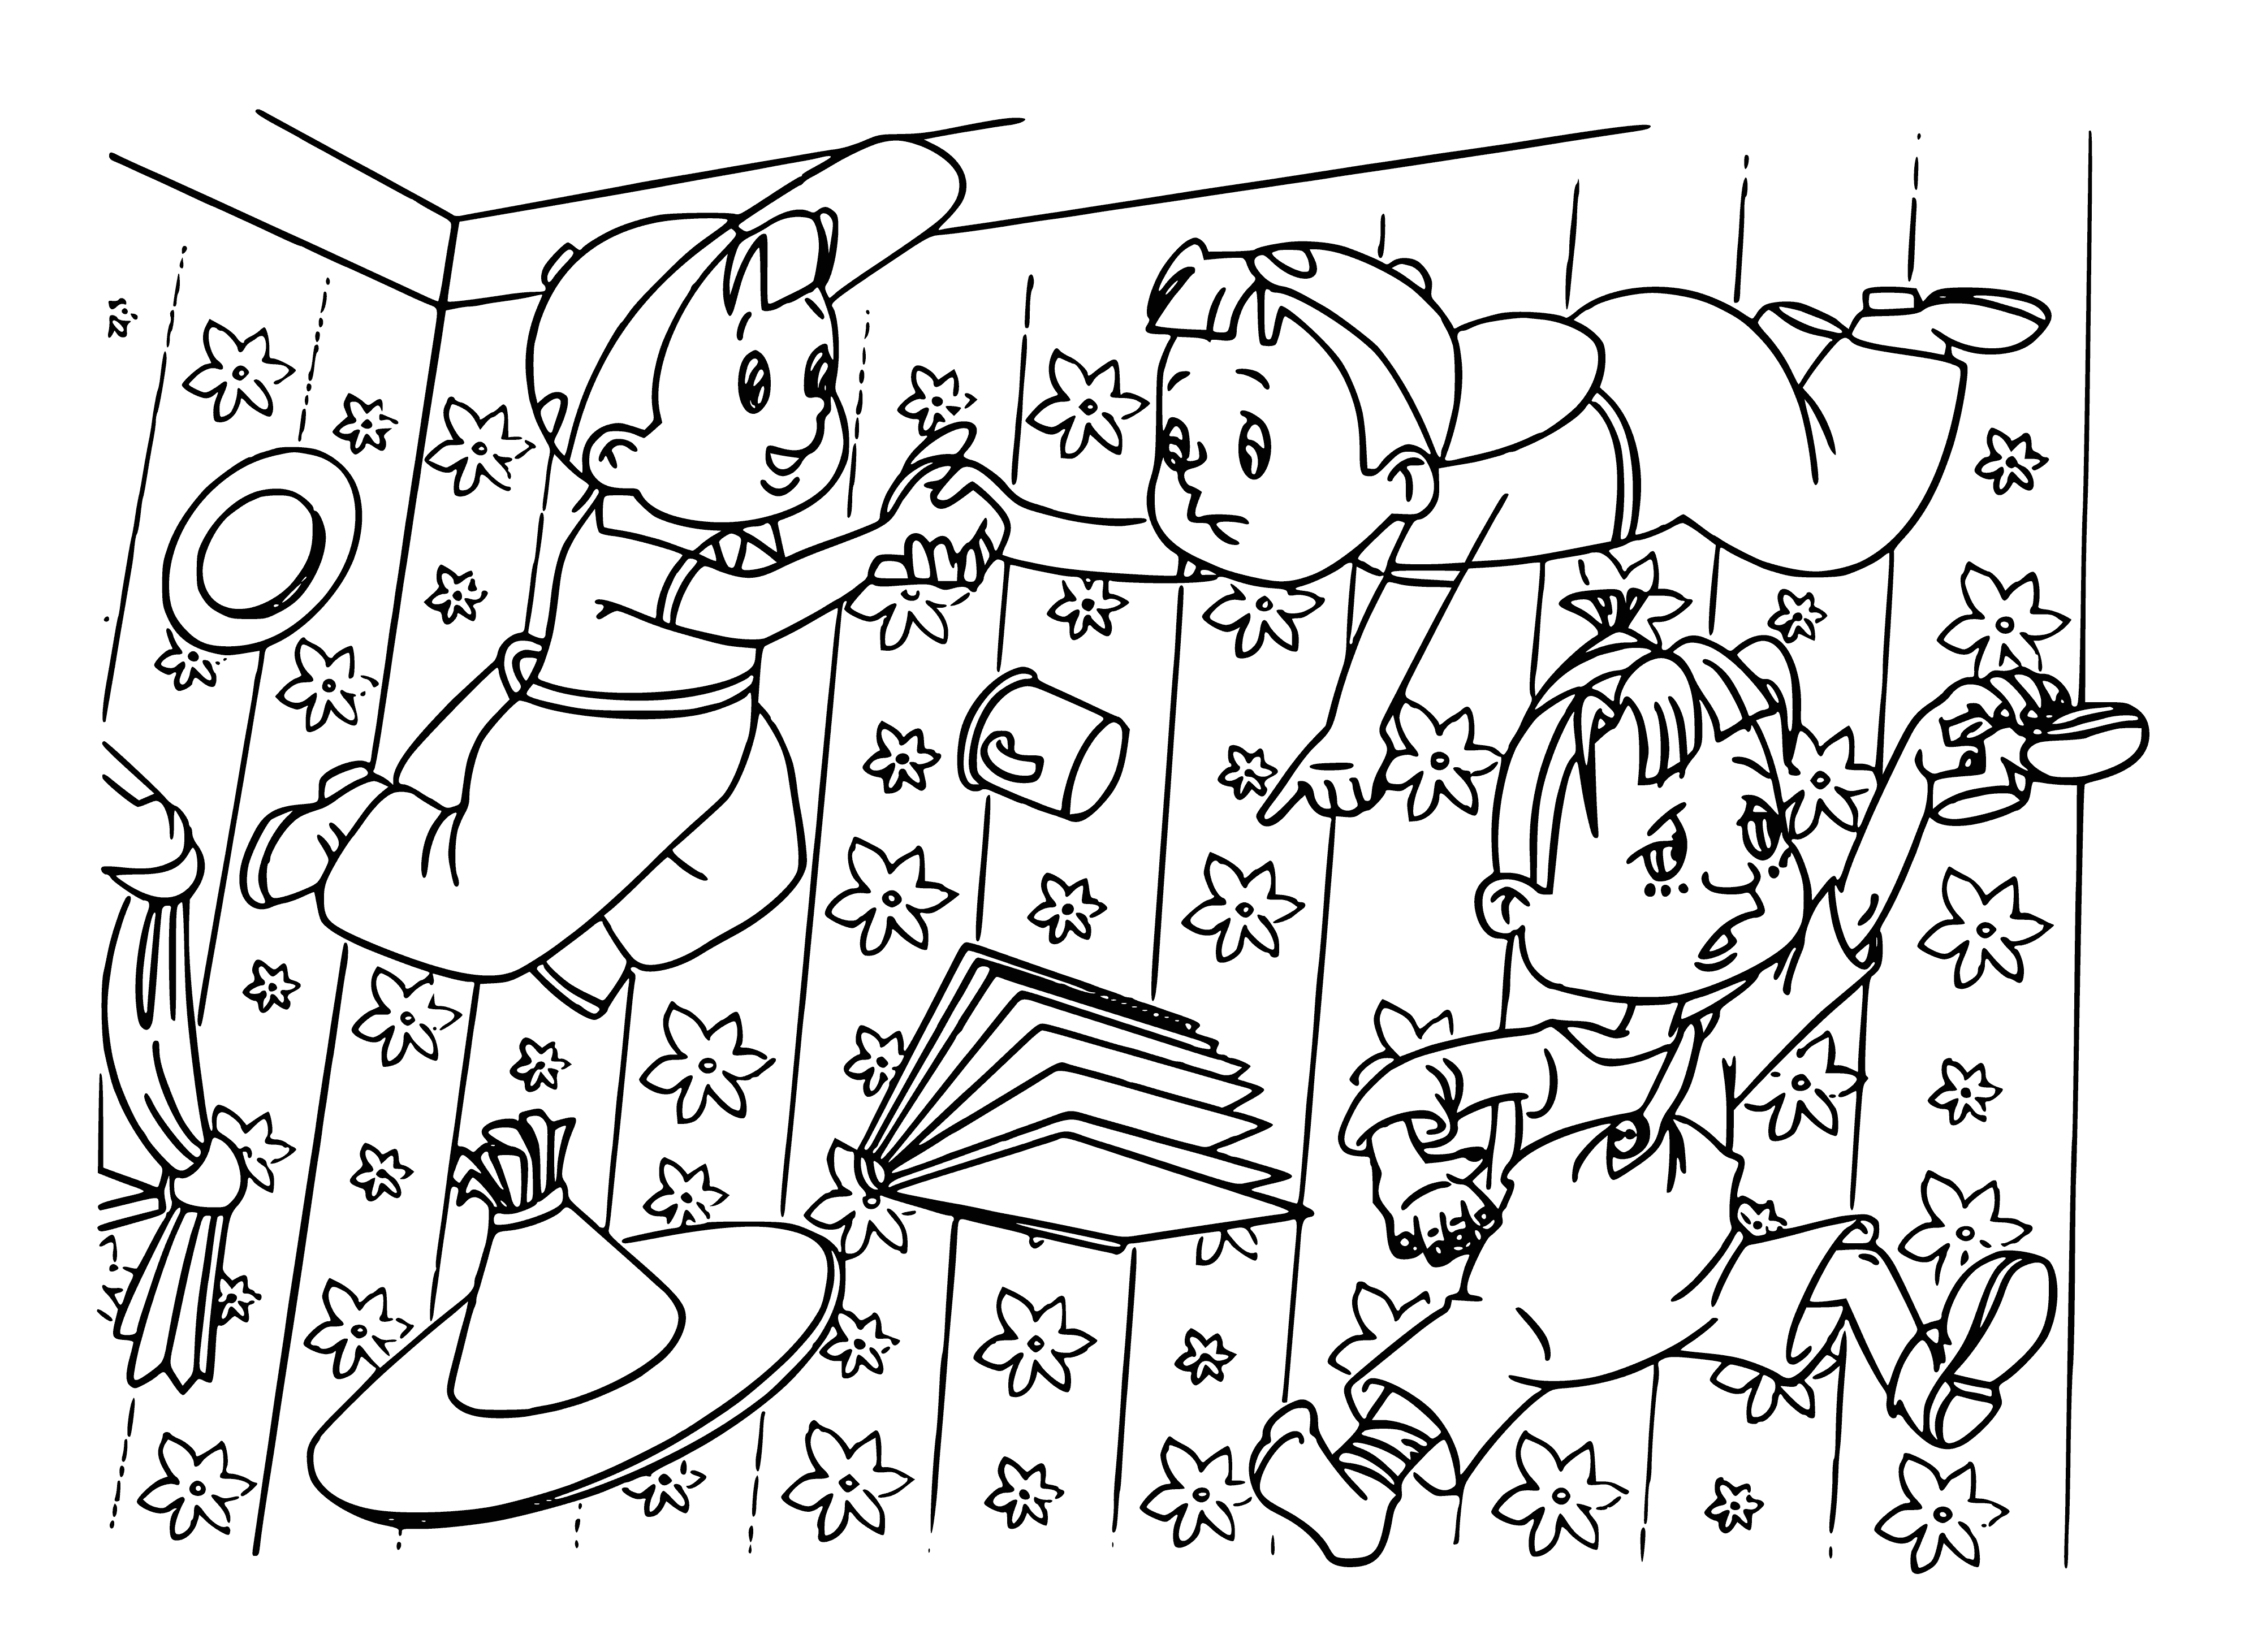 coloring page: Young boy floating in space, big smile, enjoying weightlessness, controls & dials, window showing moon - a magical coloring page experience!